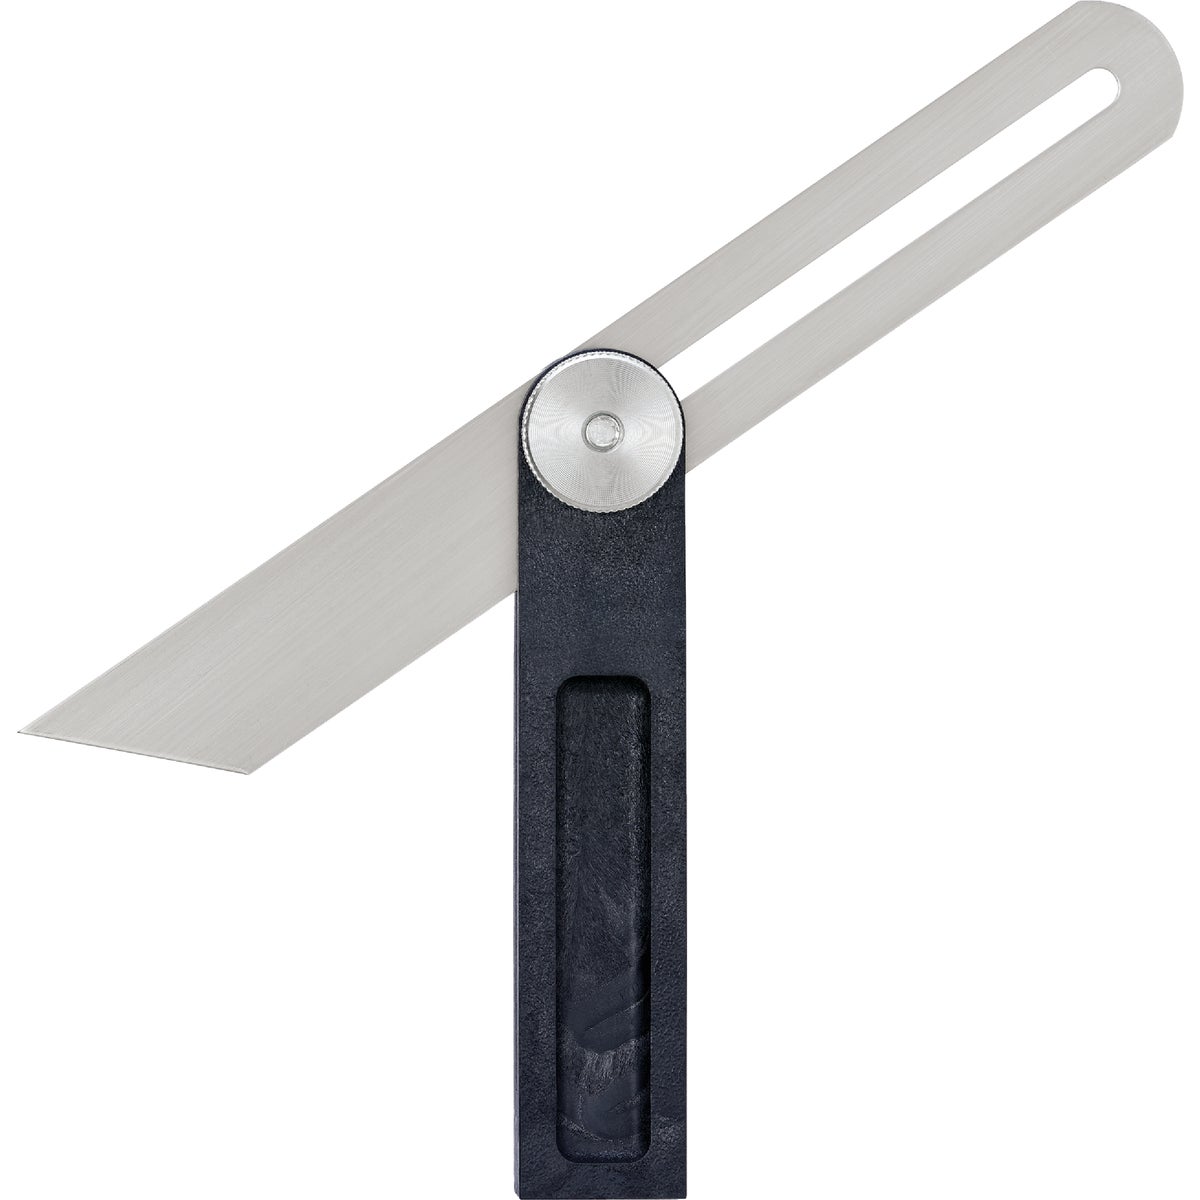 Item 321547, Empire 130 9 In. Polysteel t-bevel is great for woodworking applications.